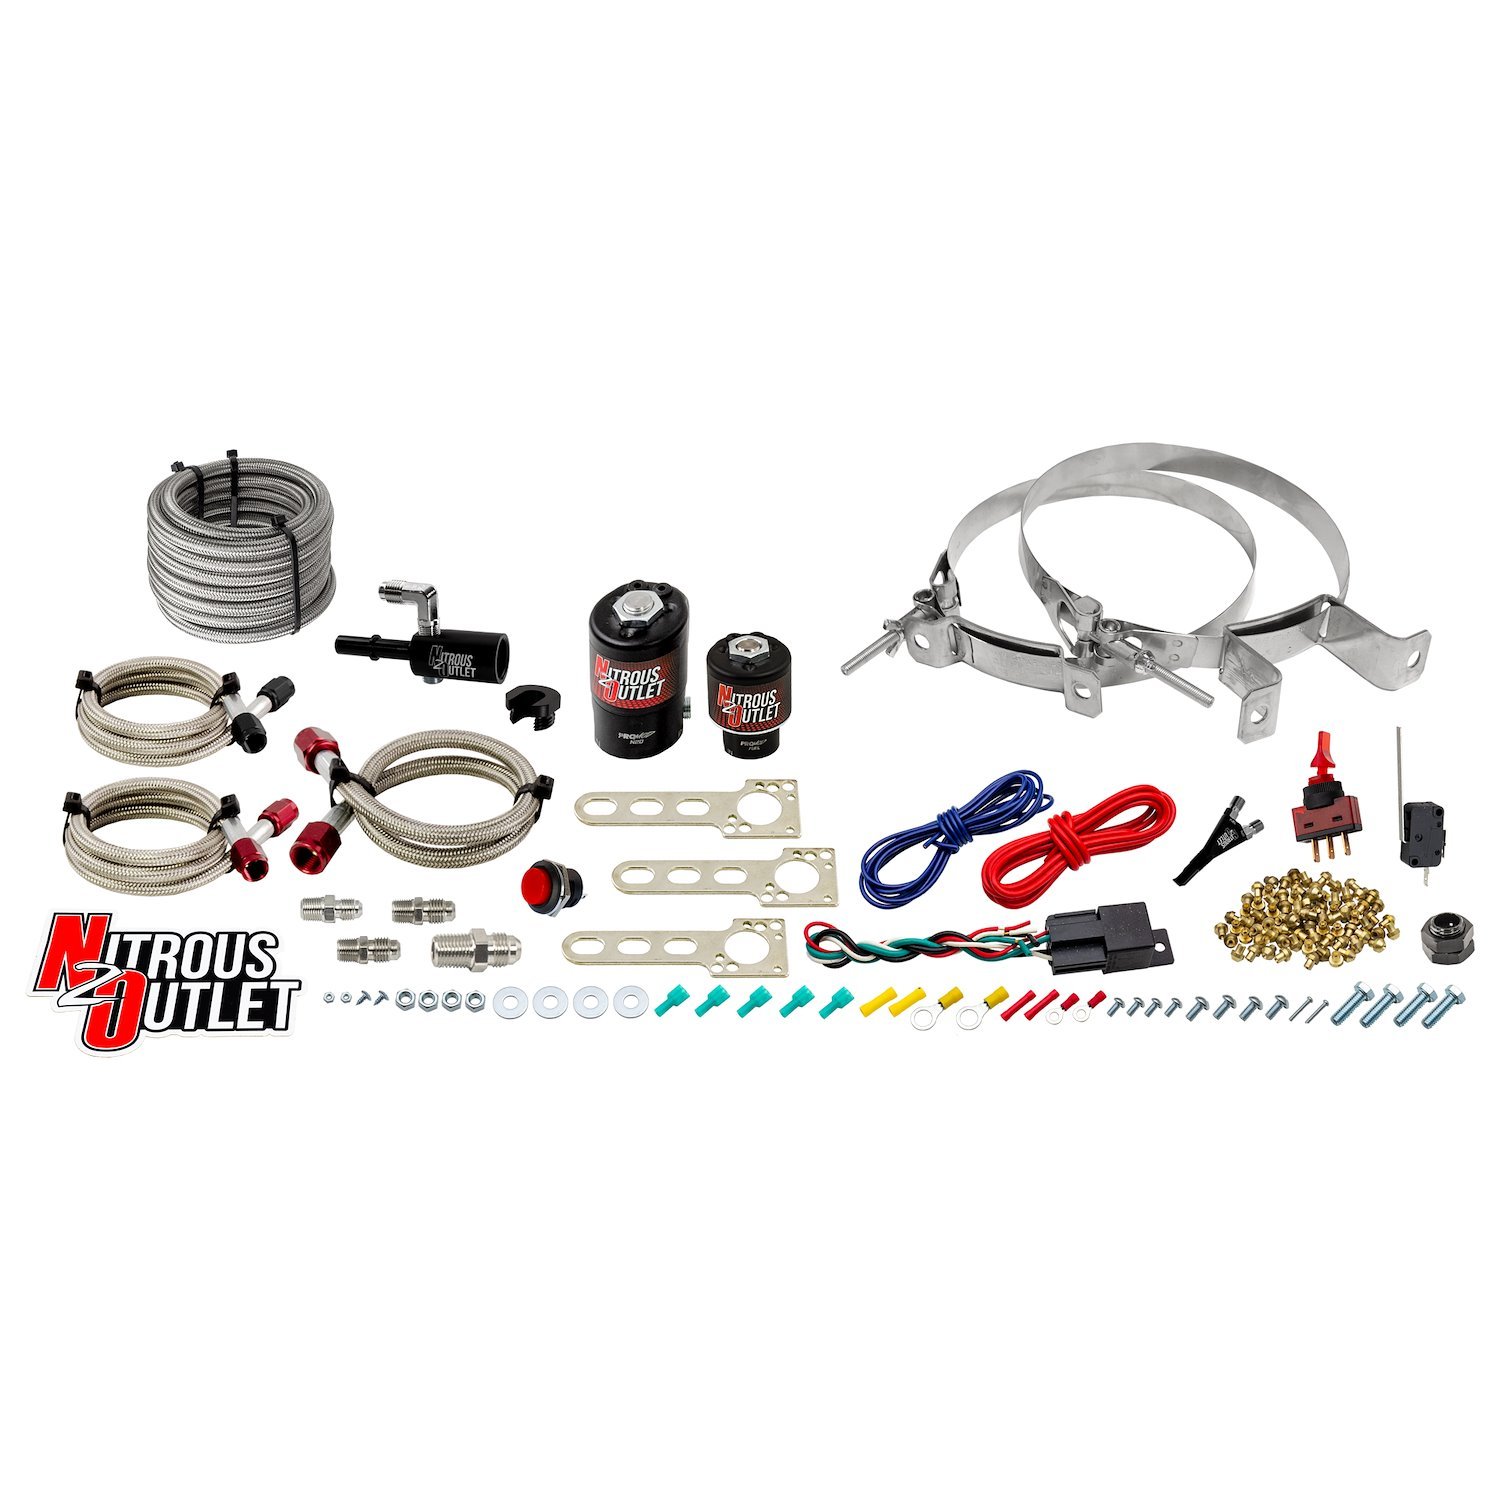 00-10016-00 EFI Single-Nozzle System, 2011-2015 Ford Mustang 5.0/F-150, Gas/E85, 5-55psi, 35-200HP, No Bottle